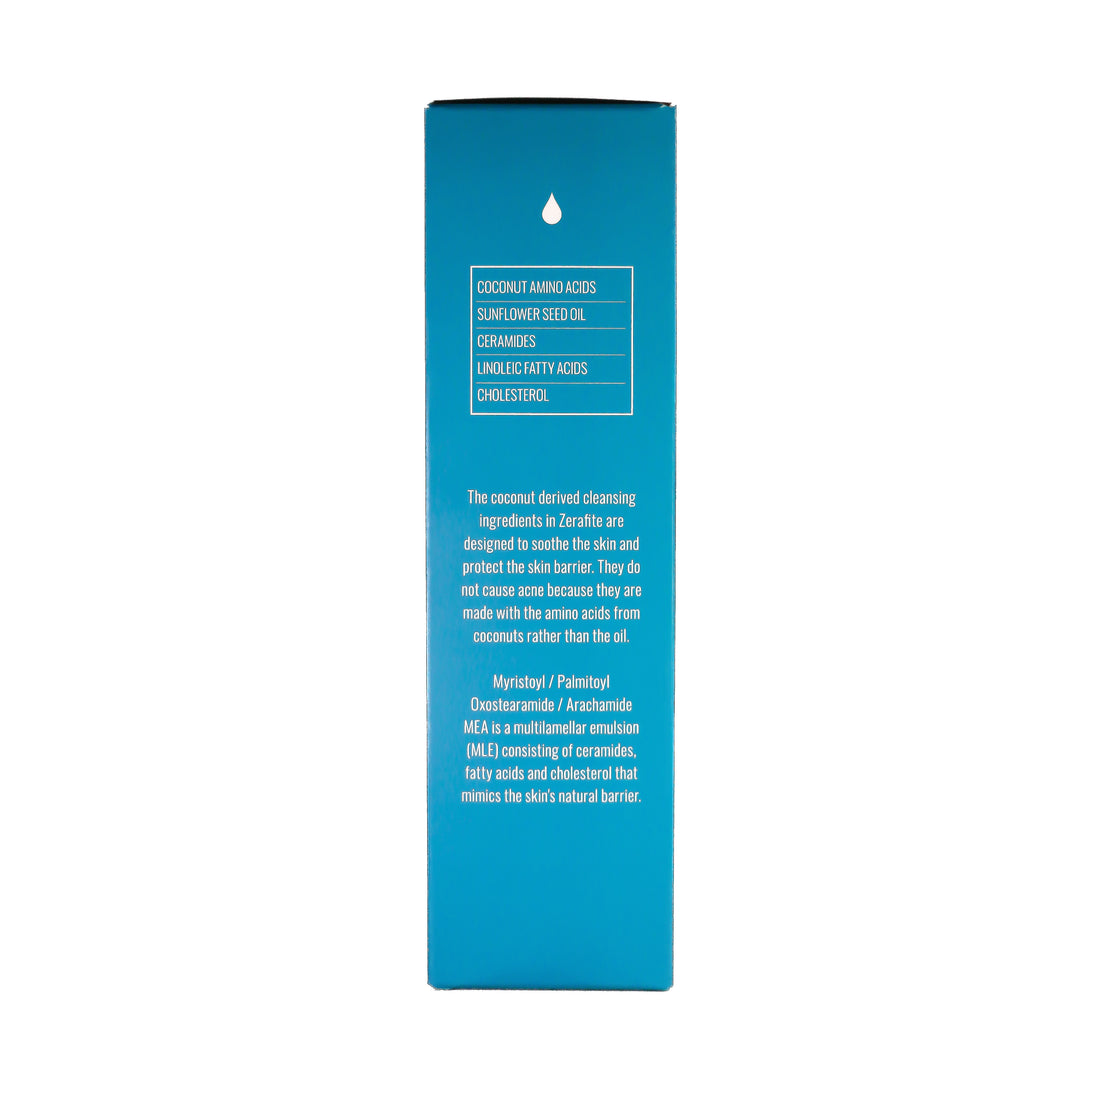 Zerafite Soothing and Calming Creamy Cleanser